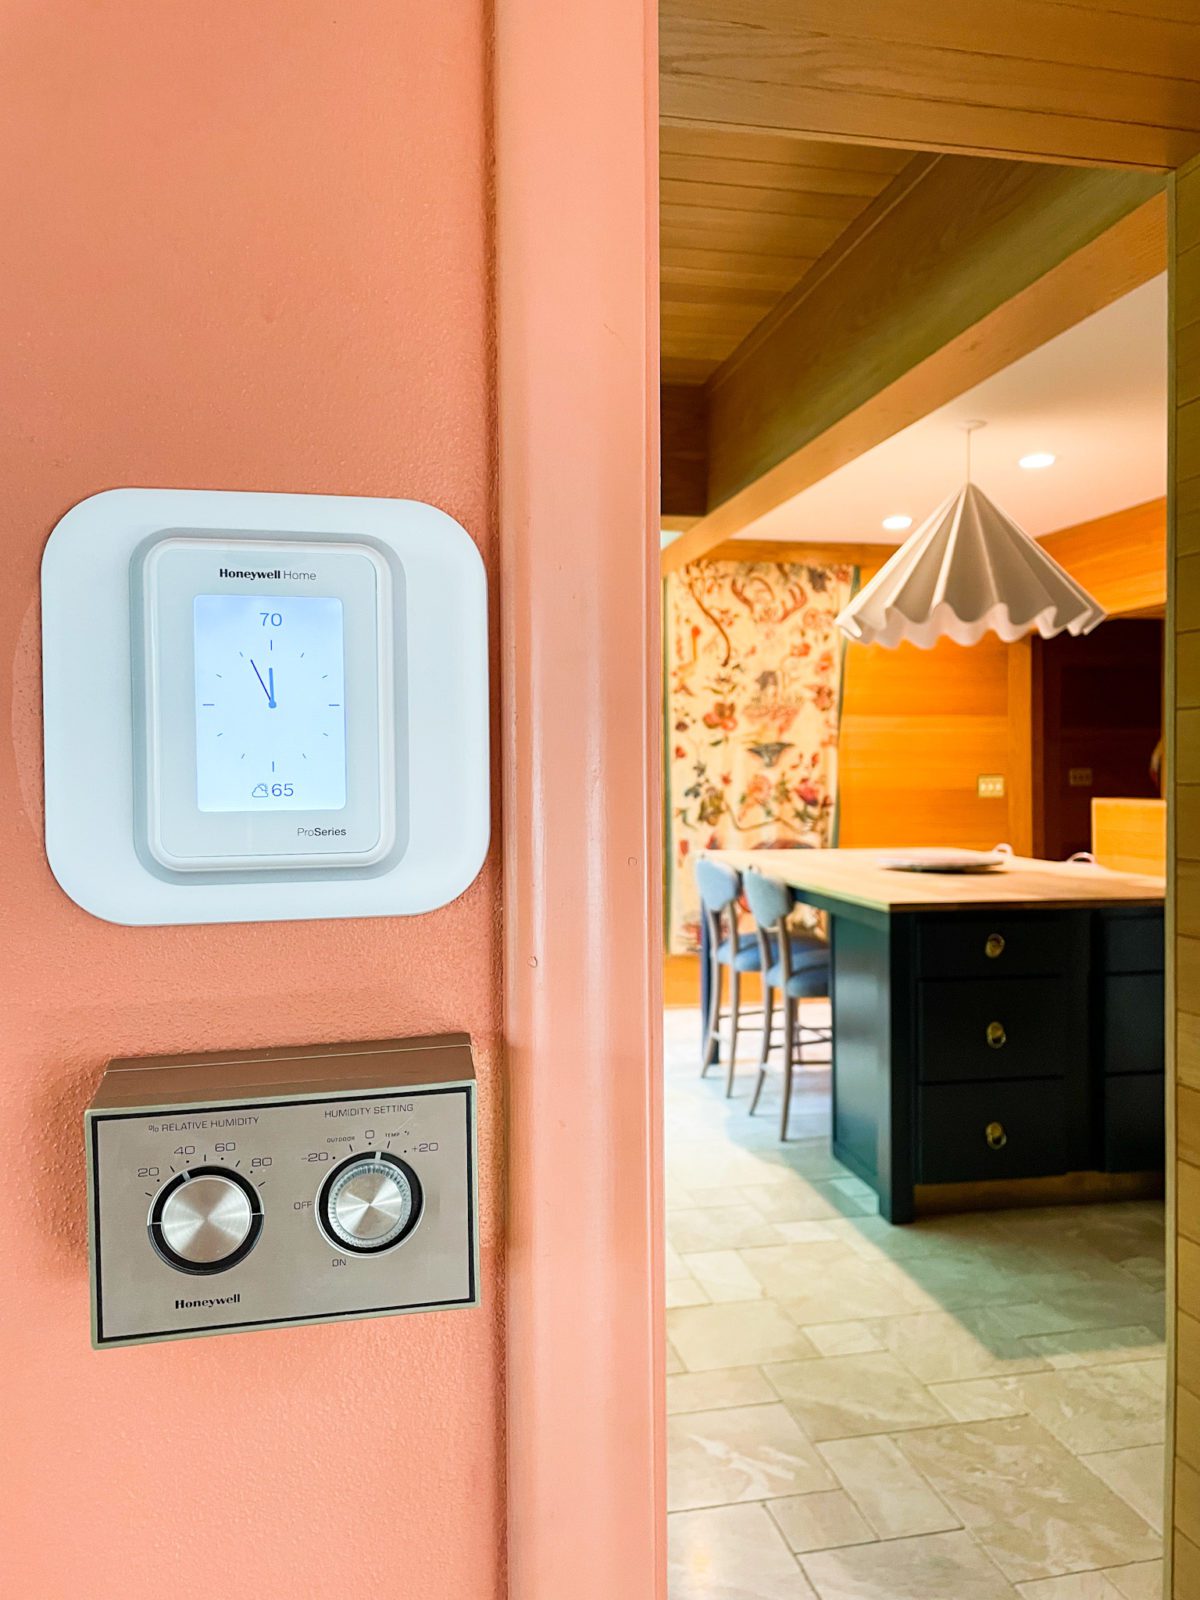 Close up image of a "smart" thermostat on the wall. In the background is a view of a kitchen.